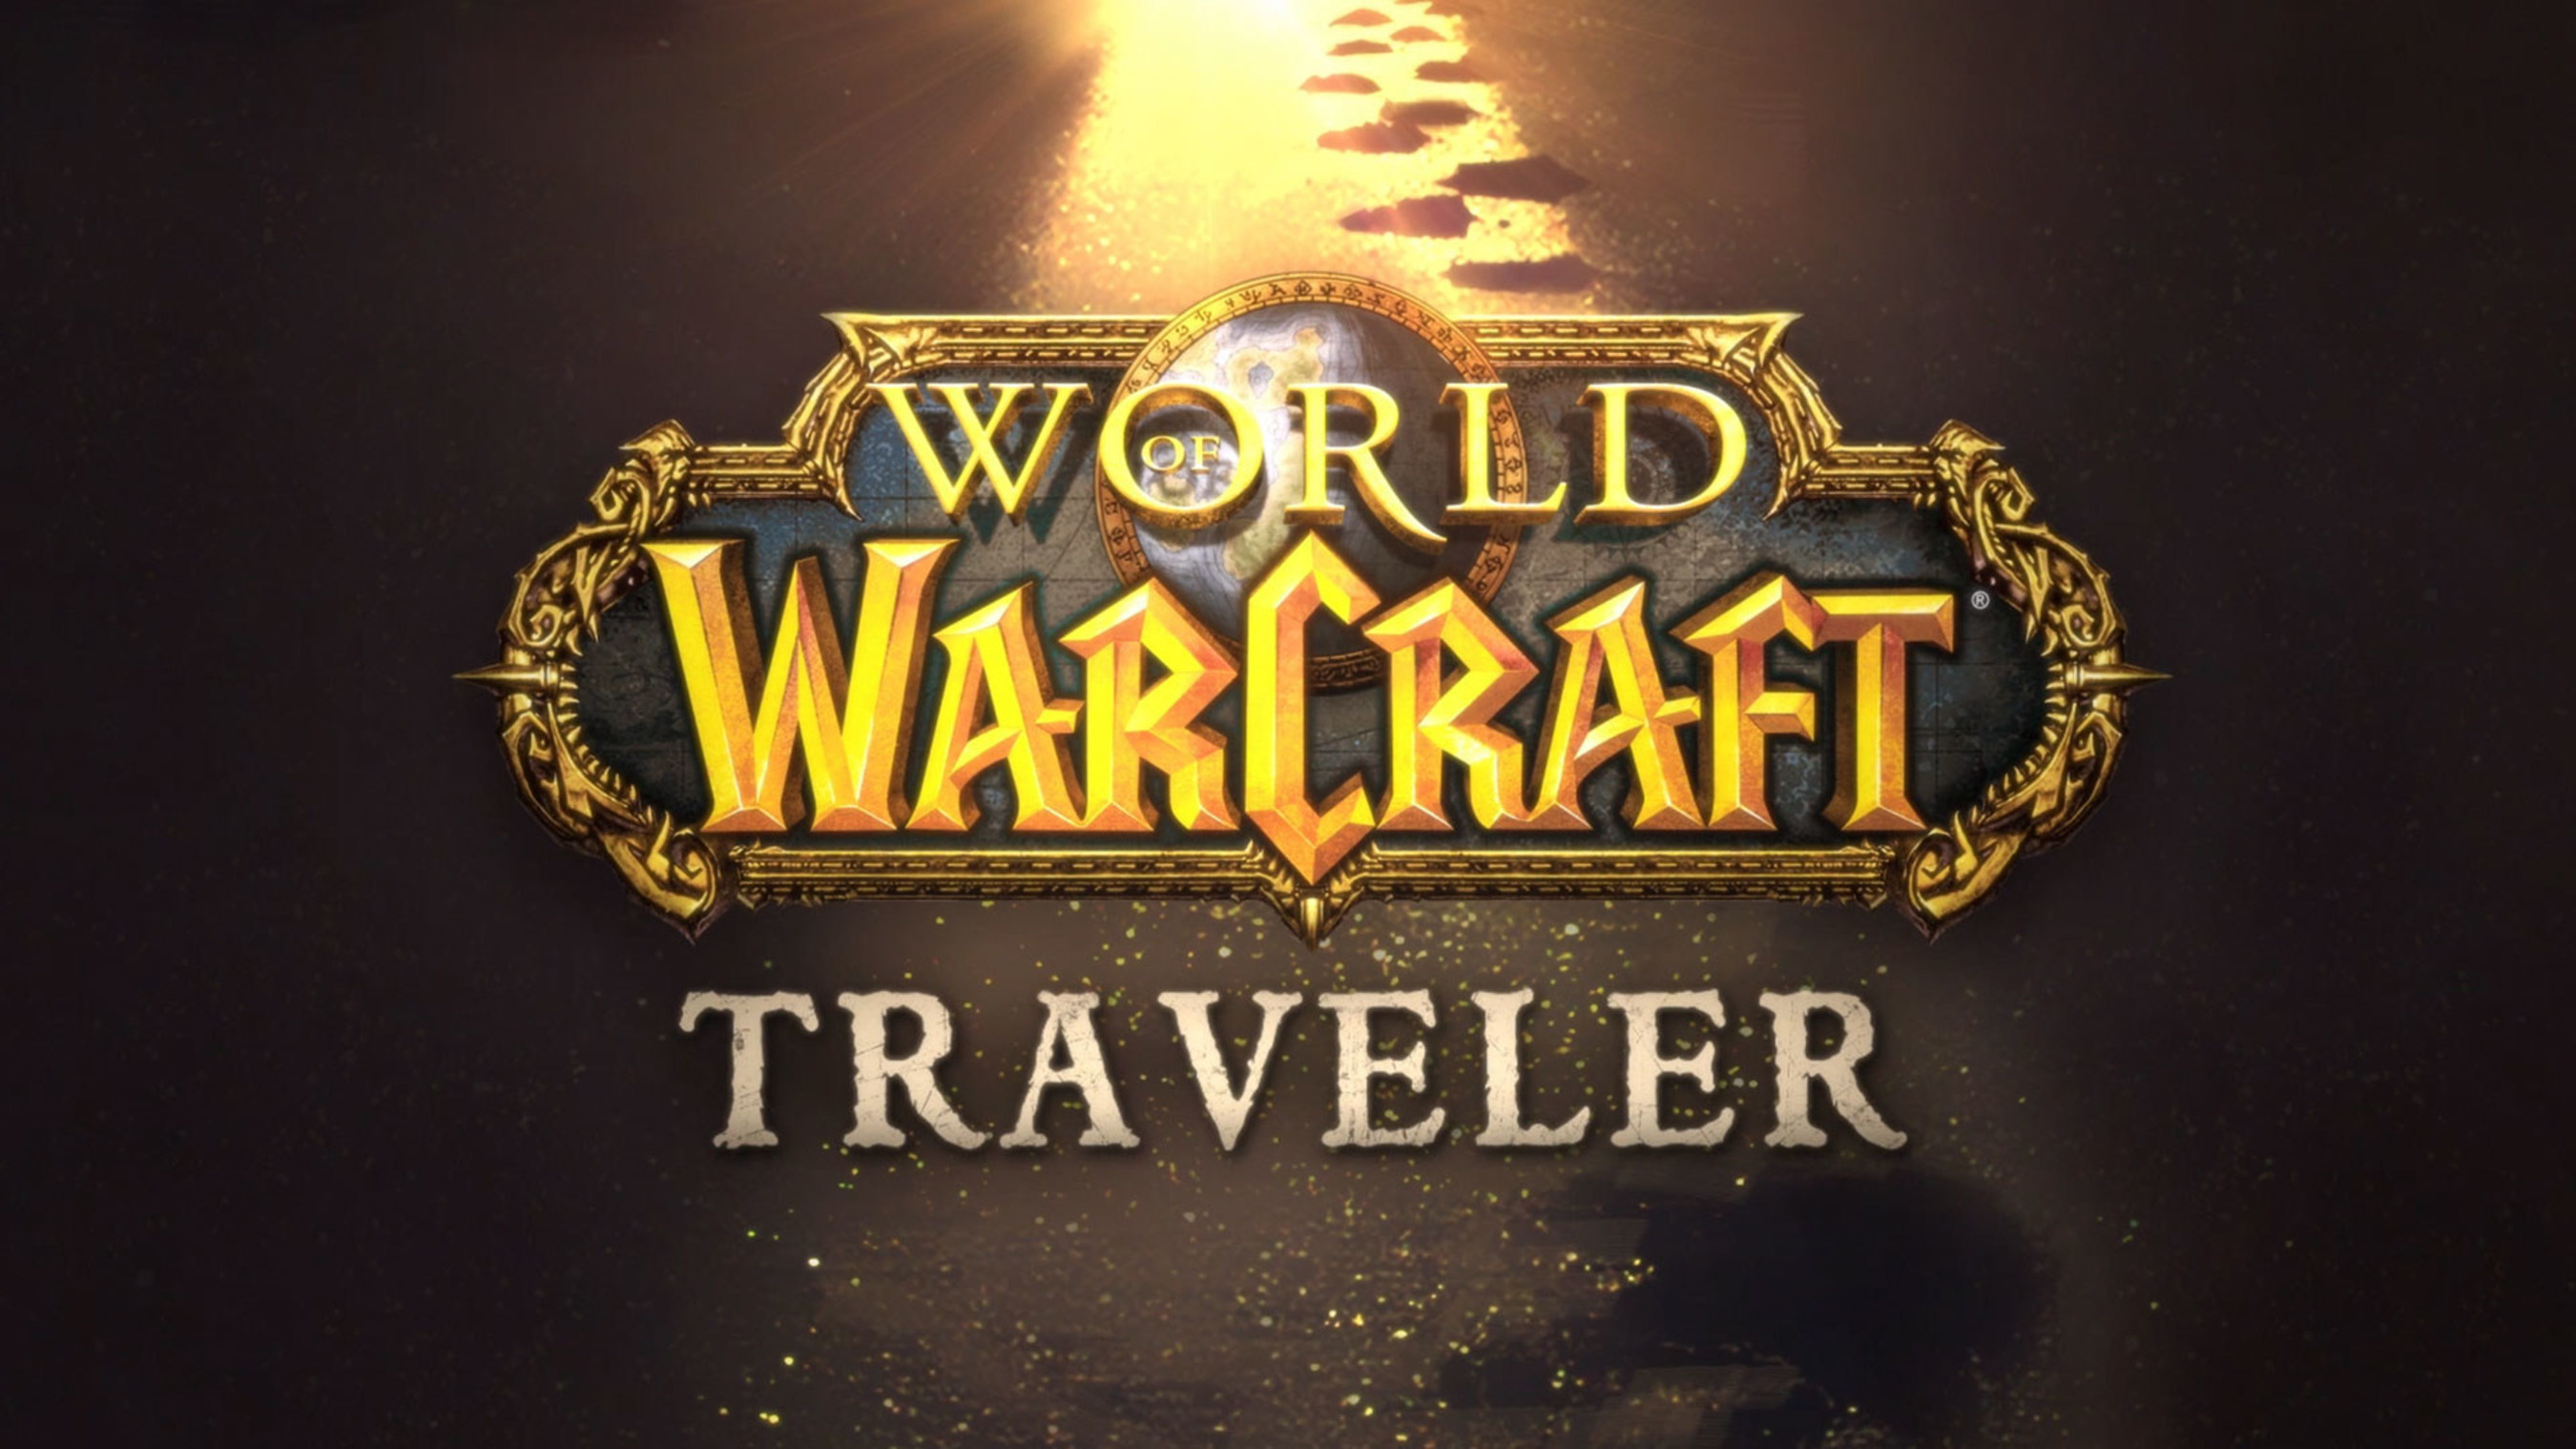 Scholastic & Blizzard Entertainment Announce World of Warcraft(R): Traveler, a New Children's Book Series Based on the Bestselling Video Game FranchiseImage Credit: Blizzard Entertainment